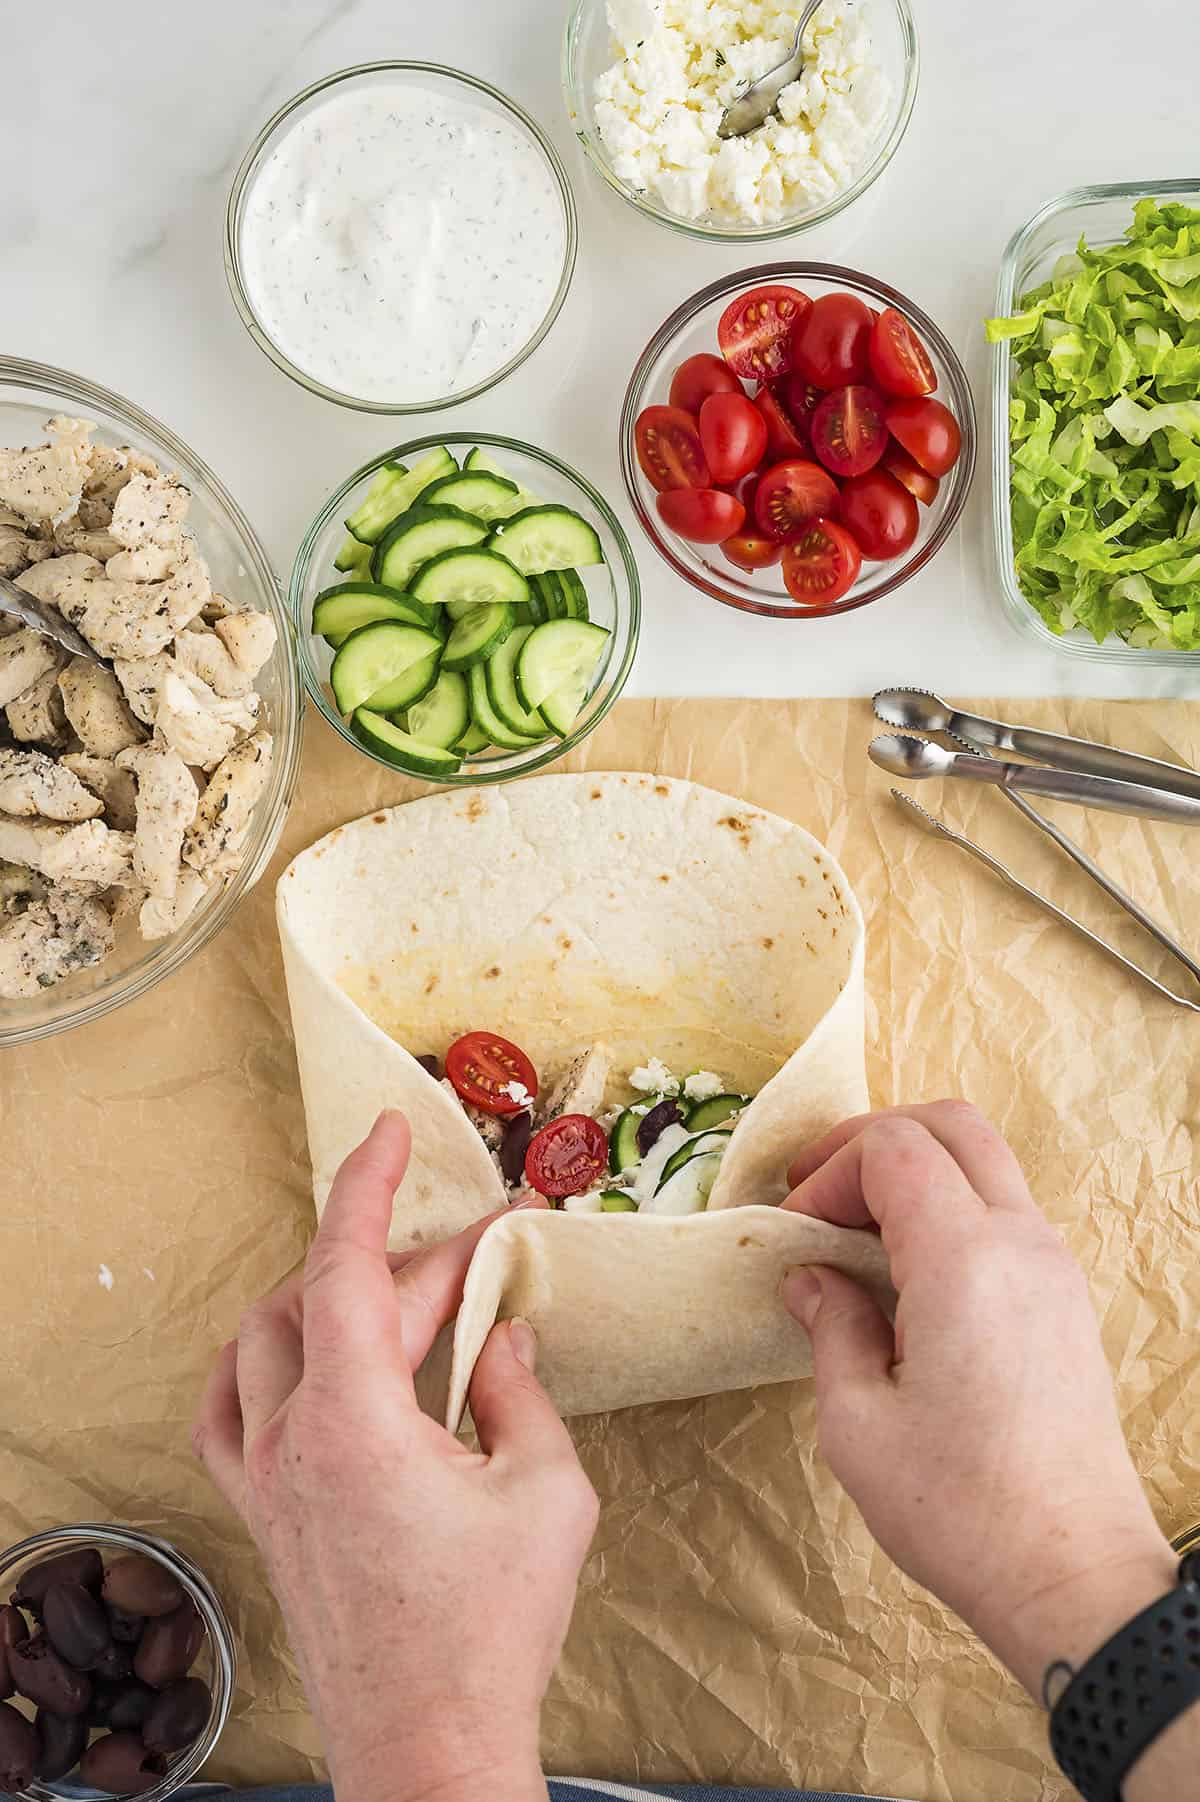 Woman's hands rolling up a tortilla filled with chicken and vegetables.